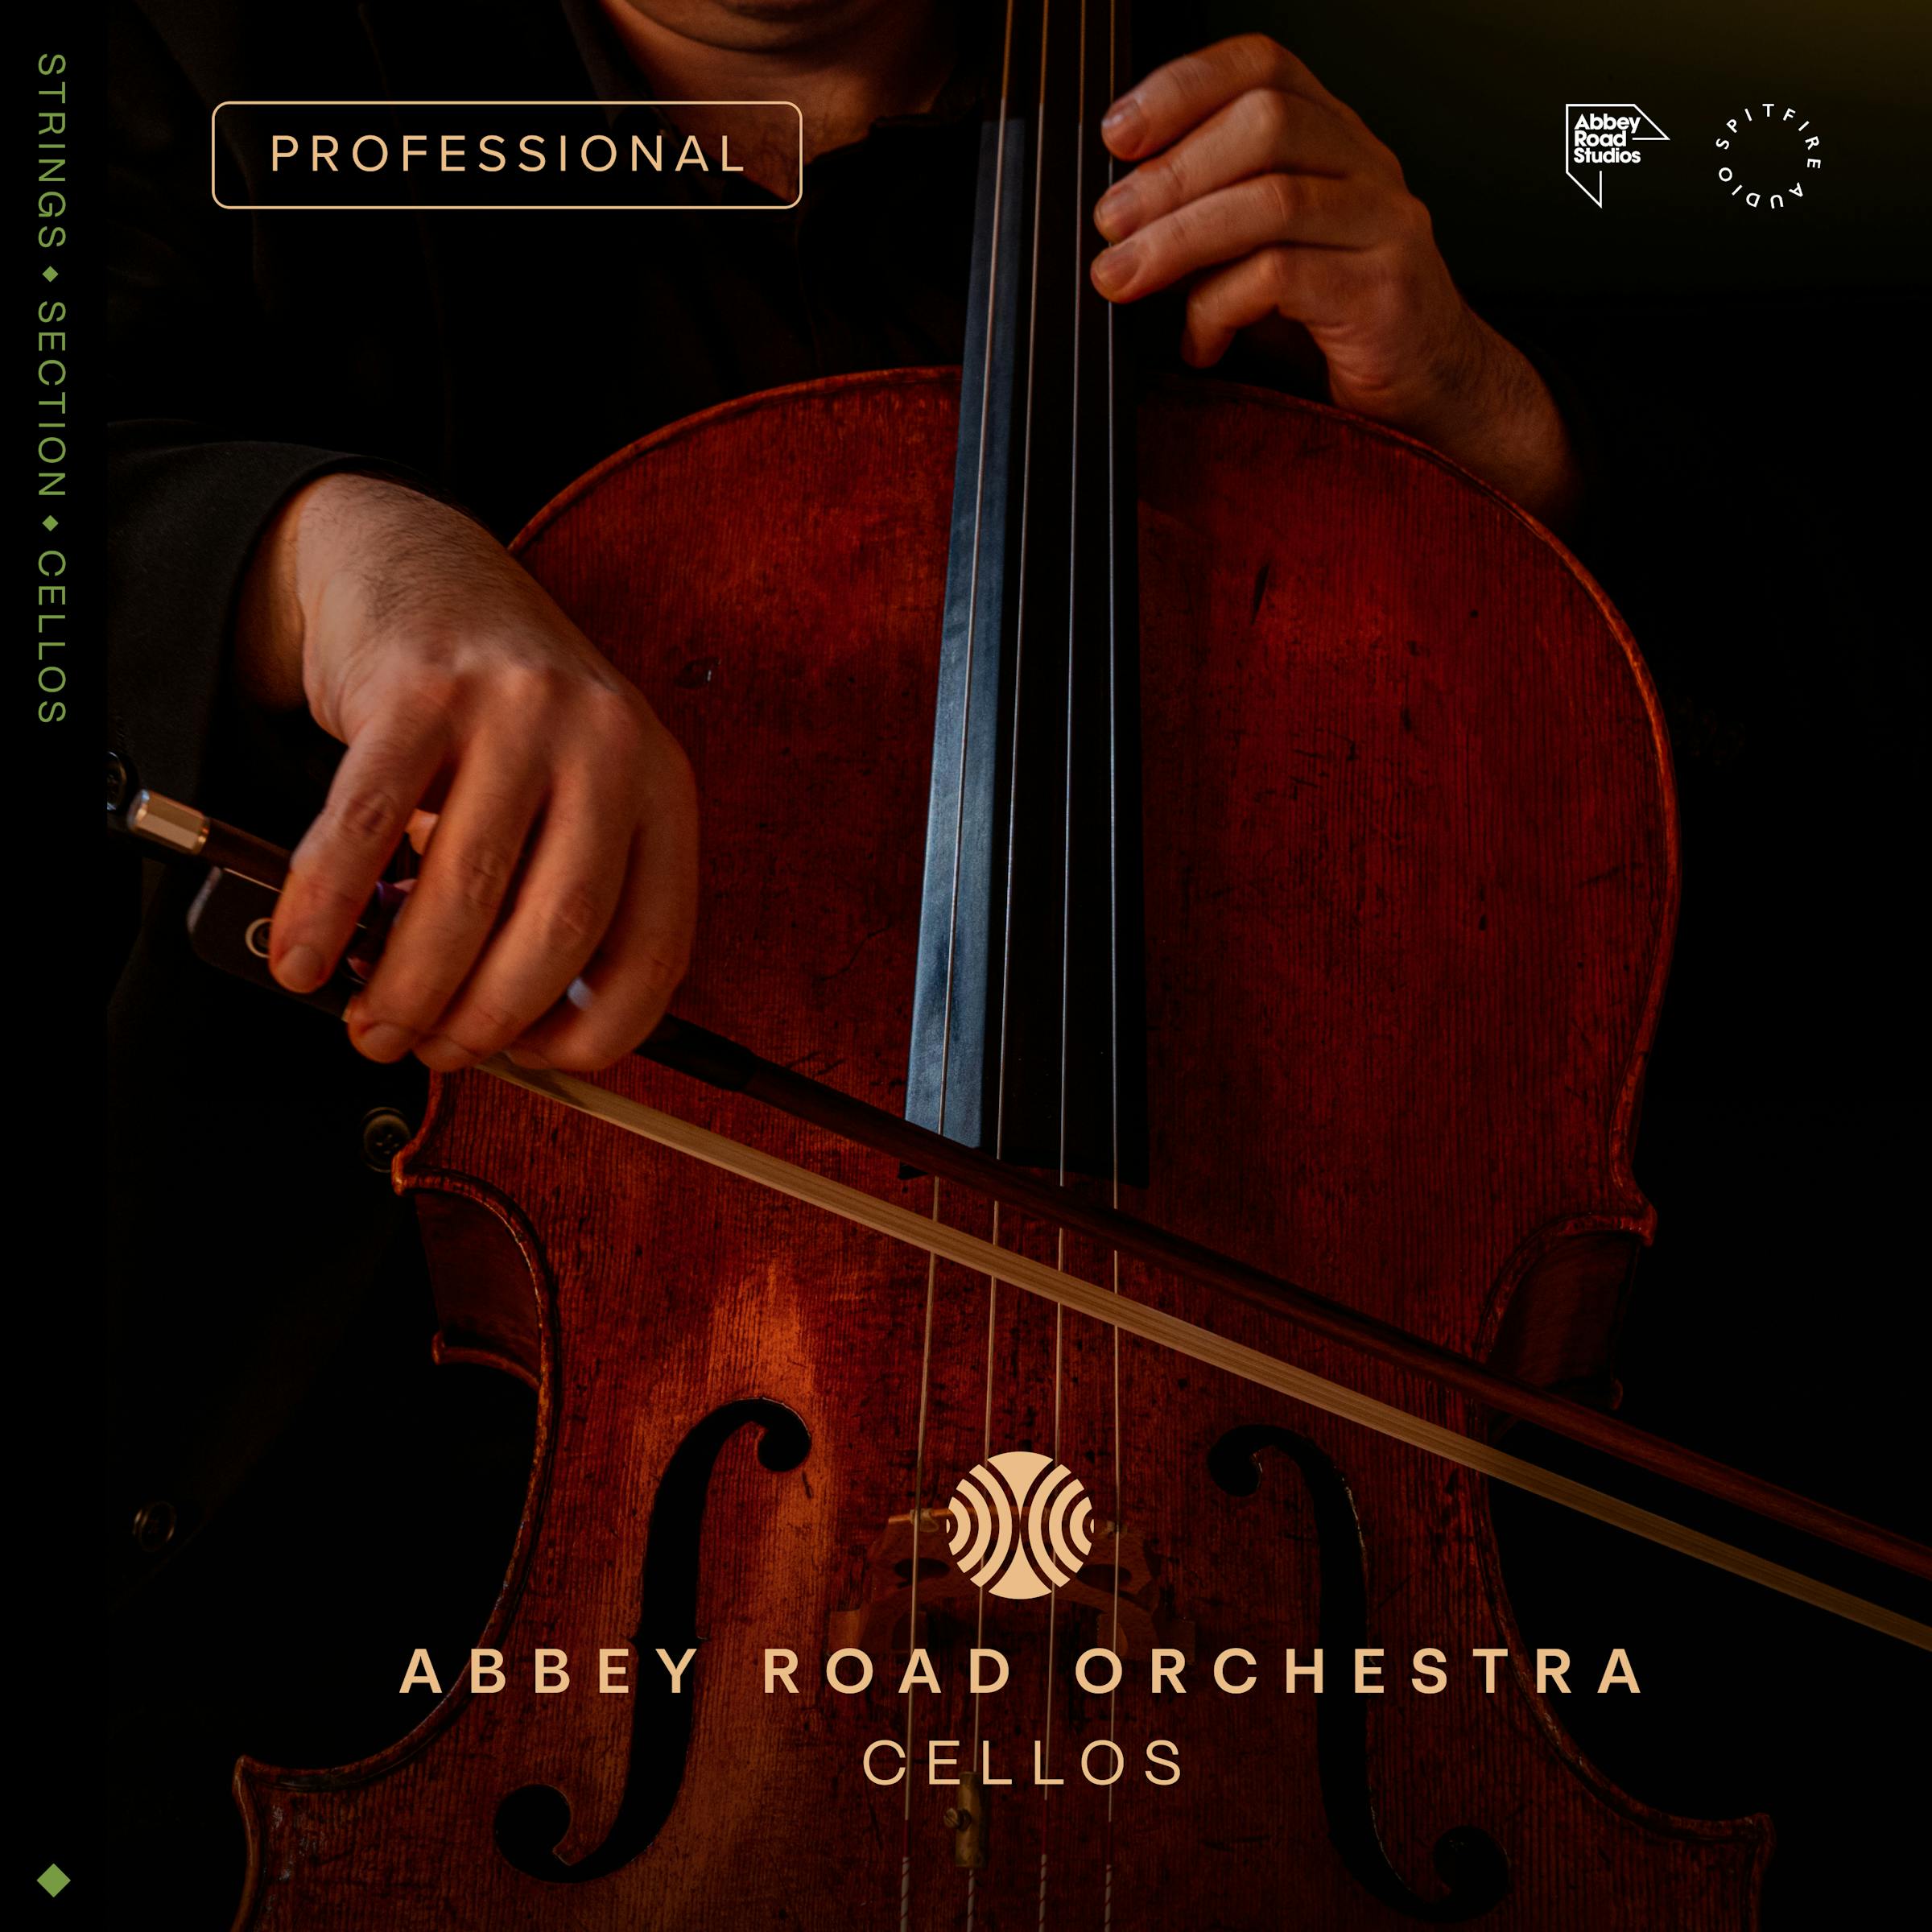 Abbey Road Orchestra: Cellos Professional. Close up of cello with hands bowing over strings.